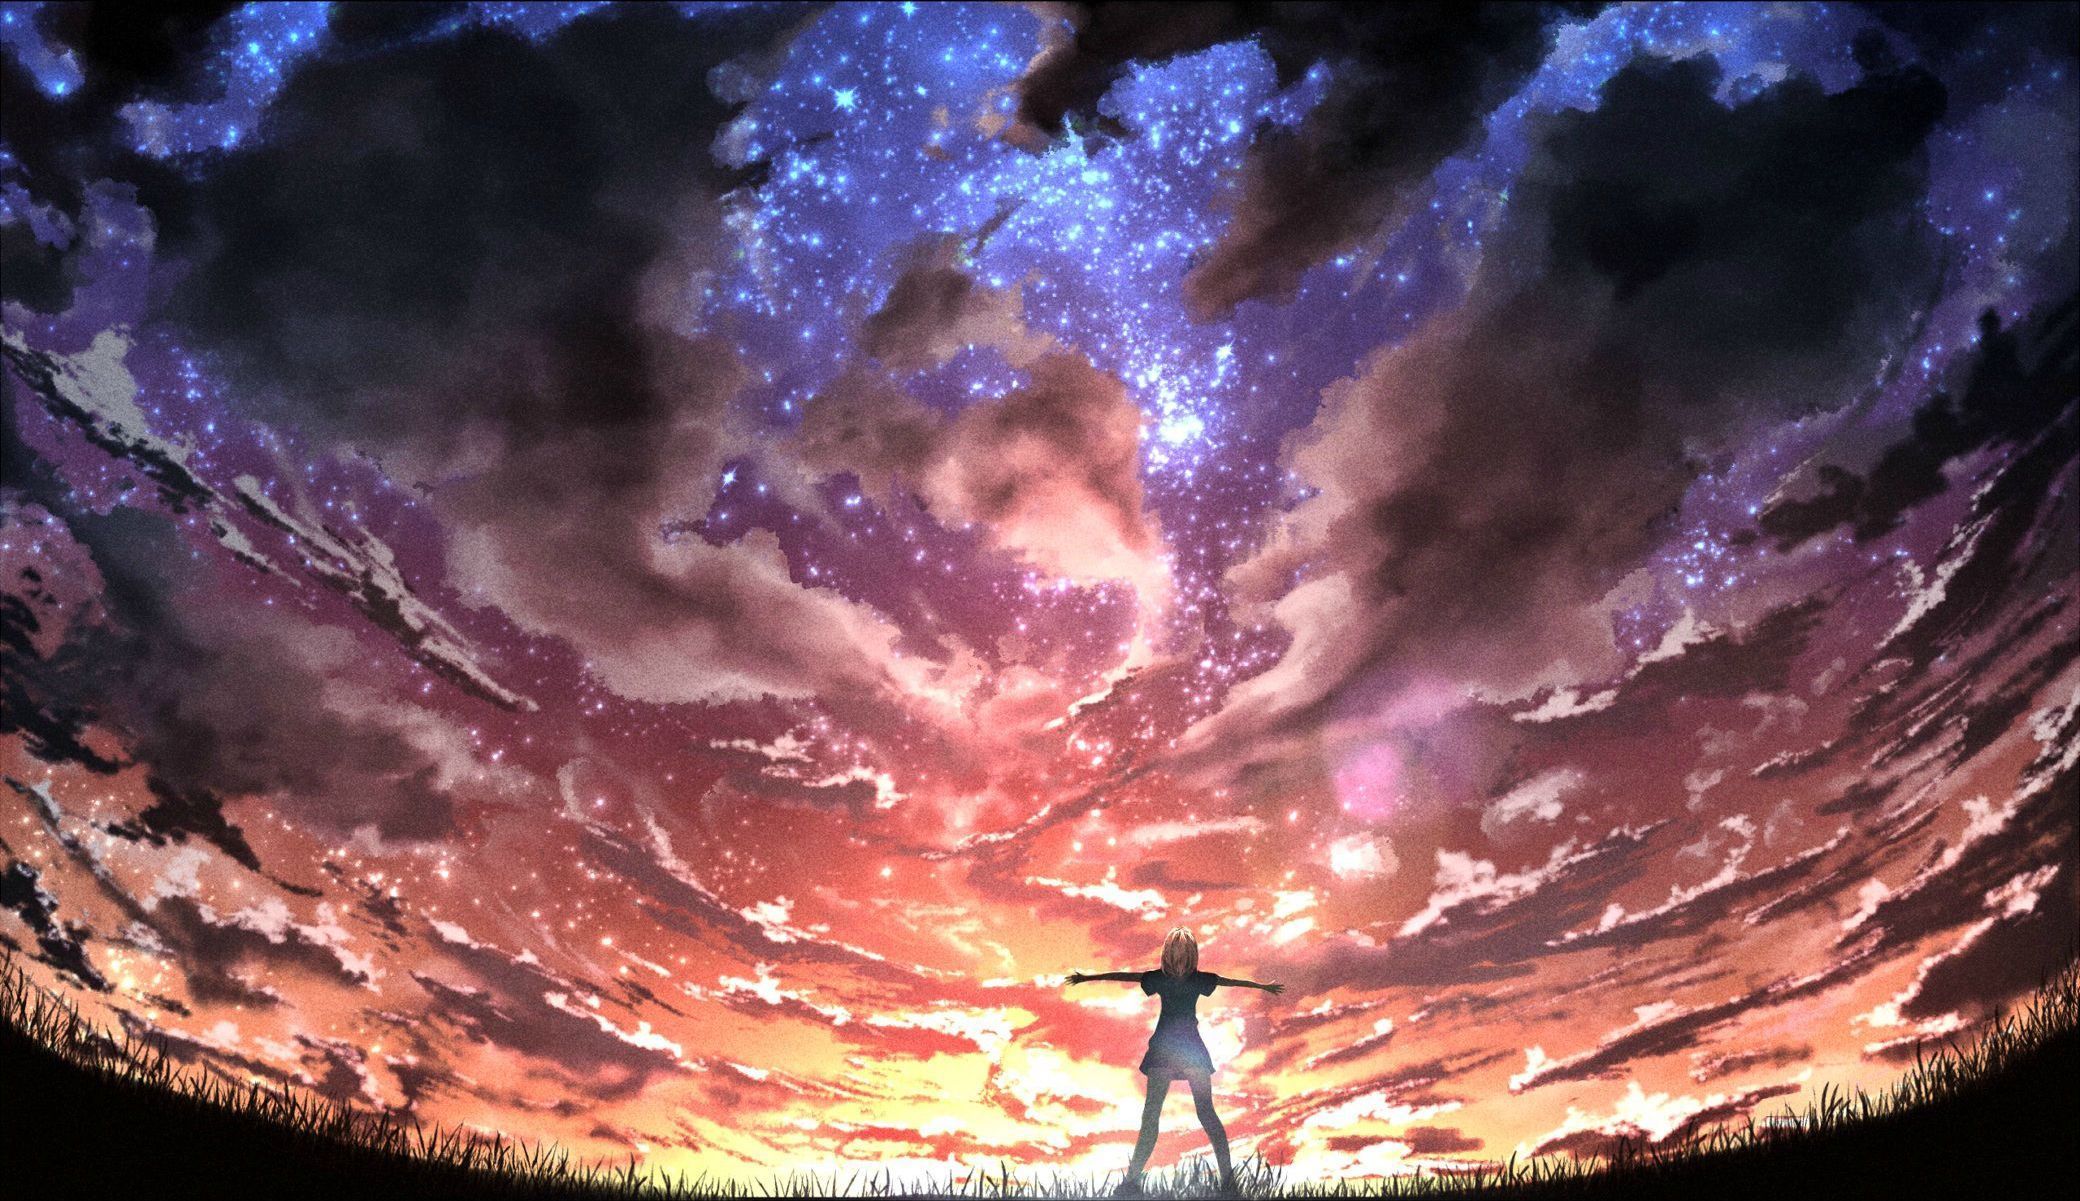 A girl standing in a field with her arms outstretched, looking up at a sky filled with stars - Anime landscape